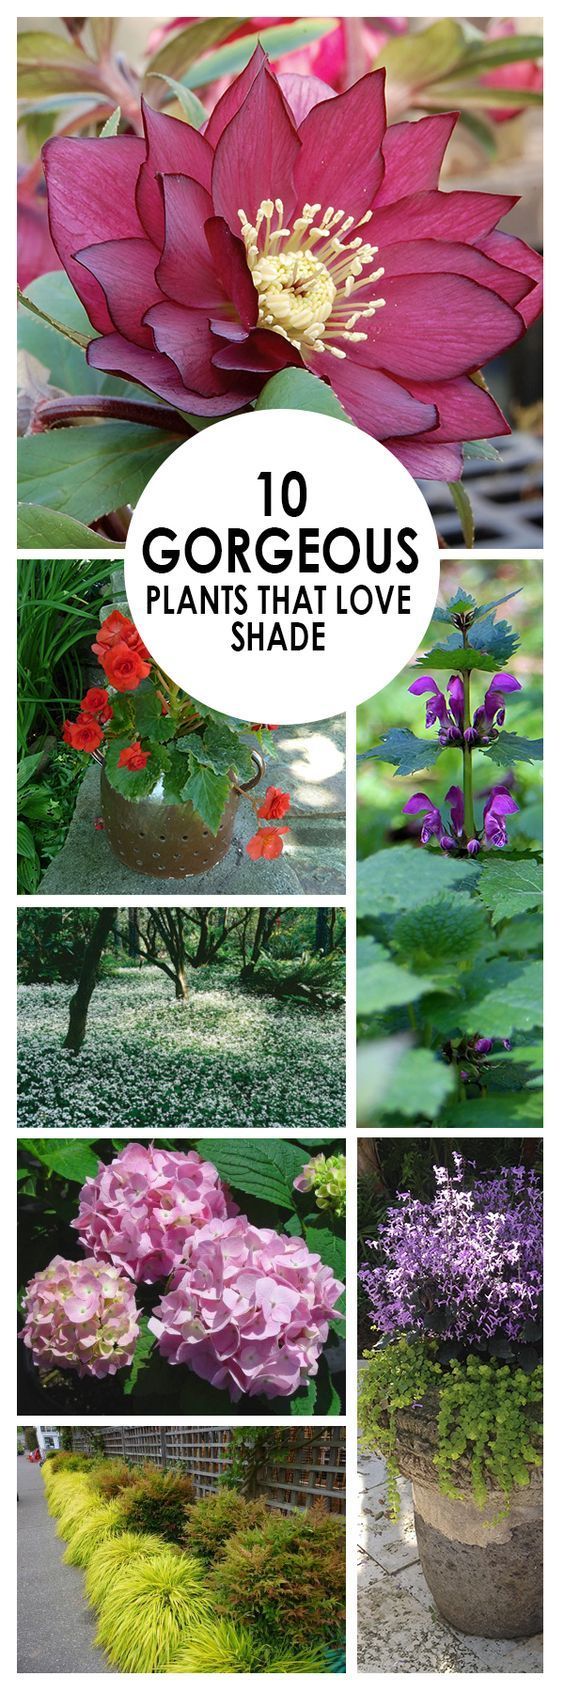 10 Gorgeous Plants that LOVE Shade: